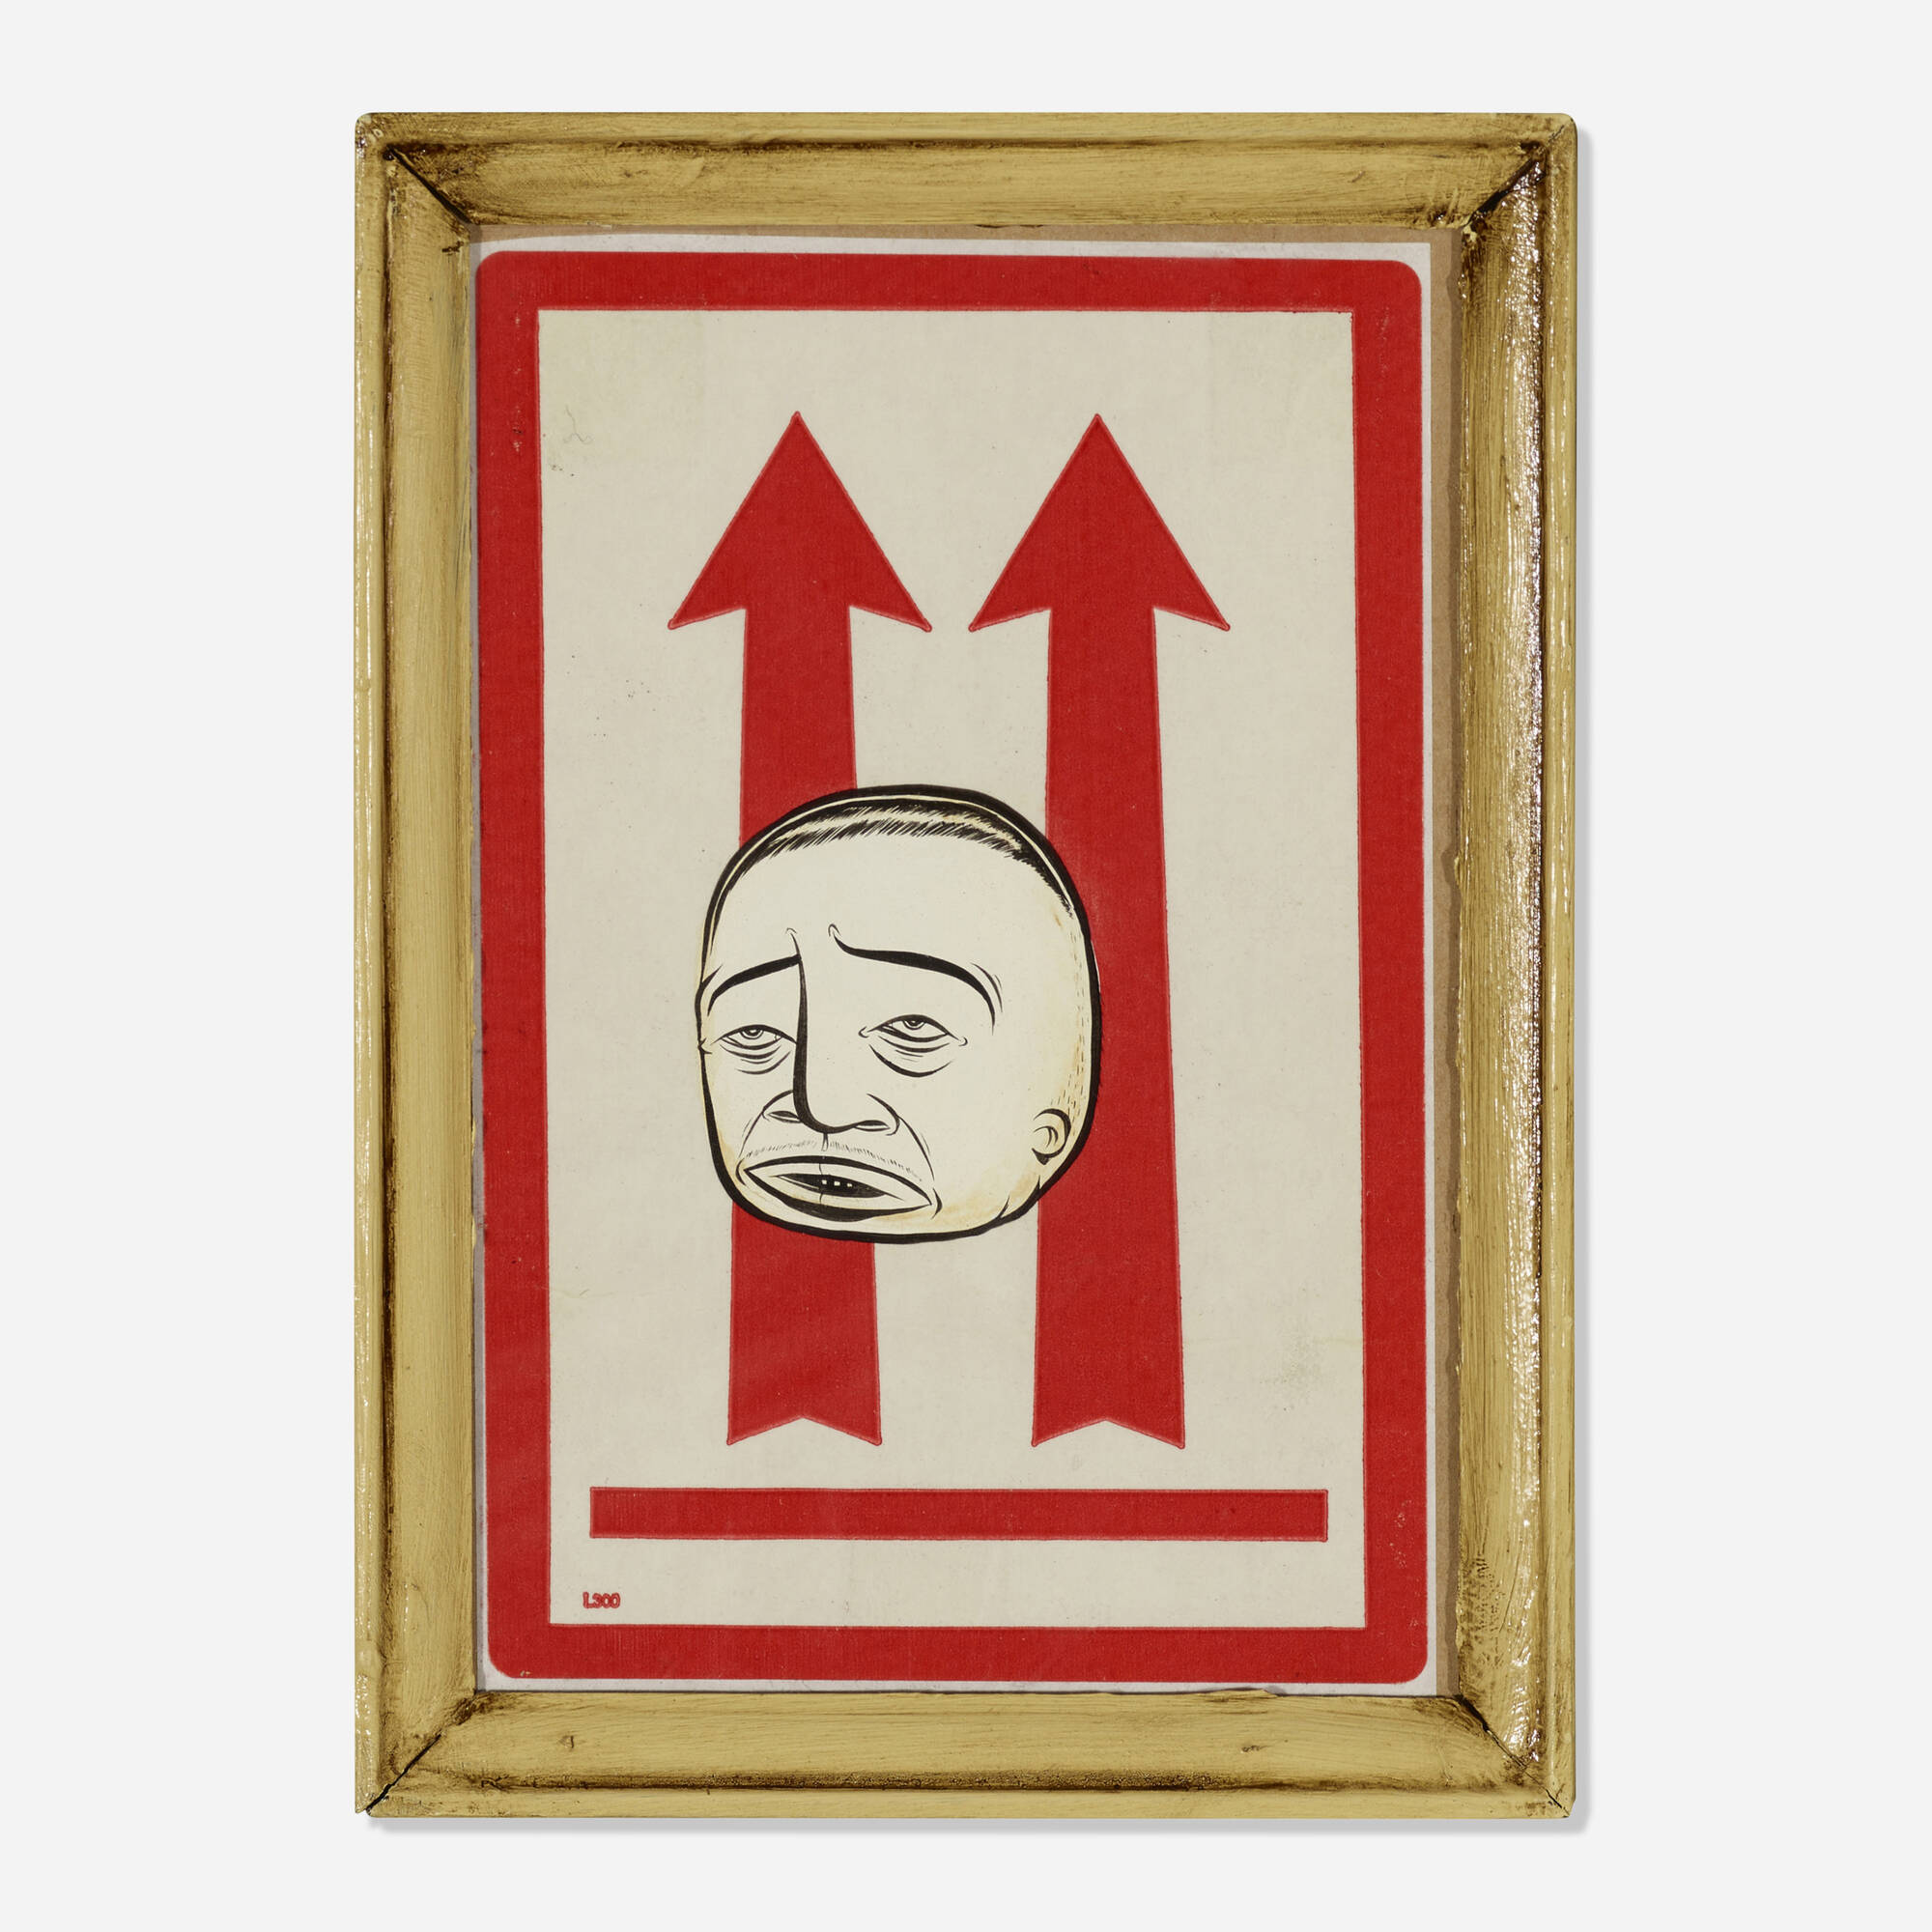 100: BARRY MCGEE, Untitled < 20|21 Art: The Chicago Edition, 1 